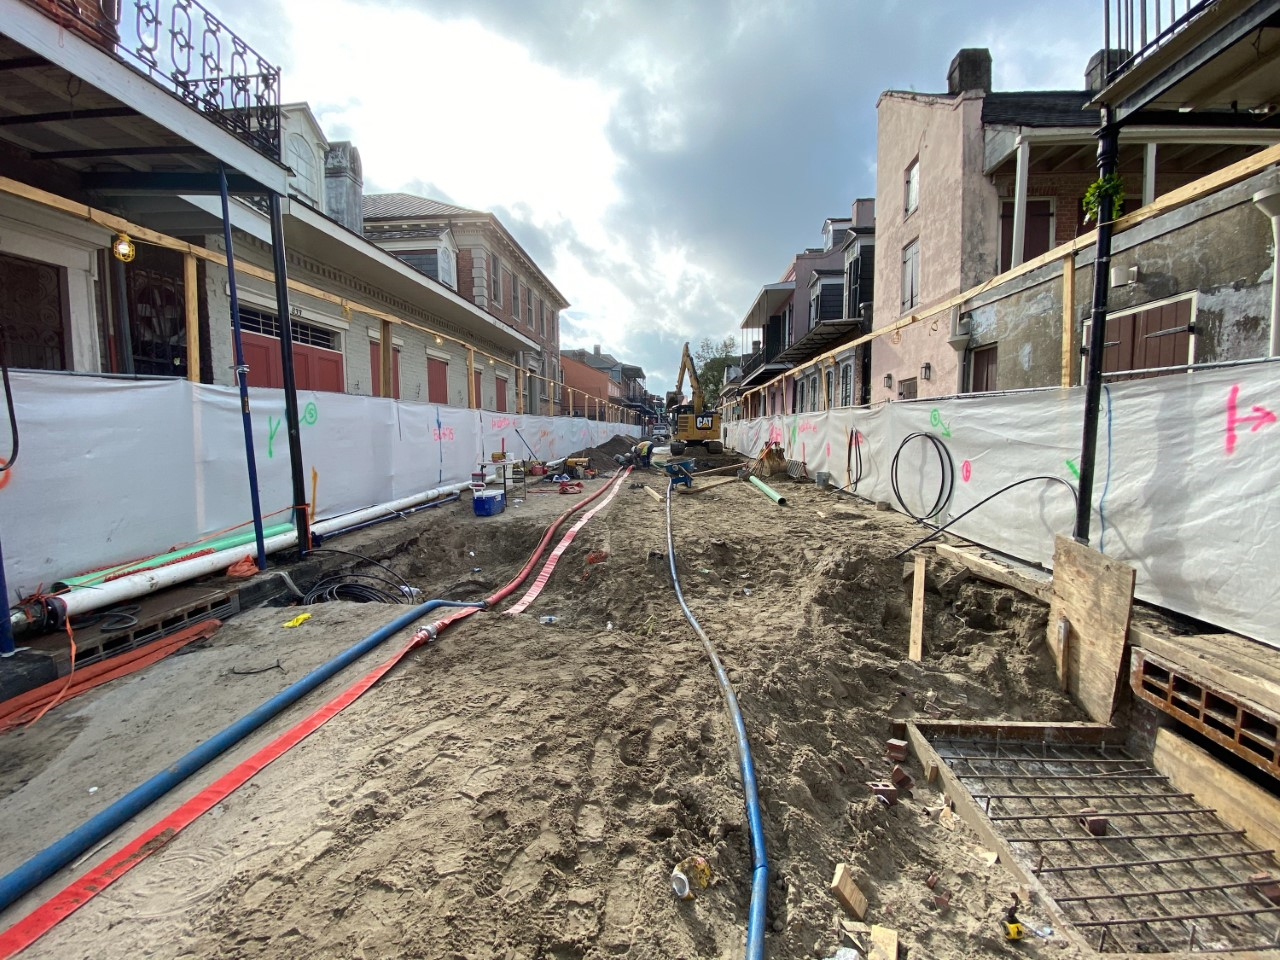 FULL DEPTH RECONSTRUCTION CONTINUES ON ST. ANN STREET